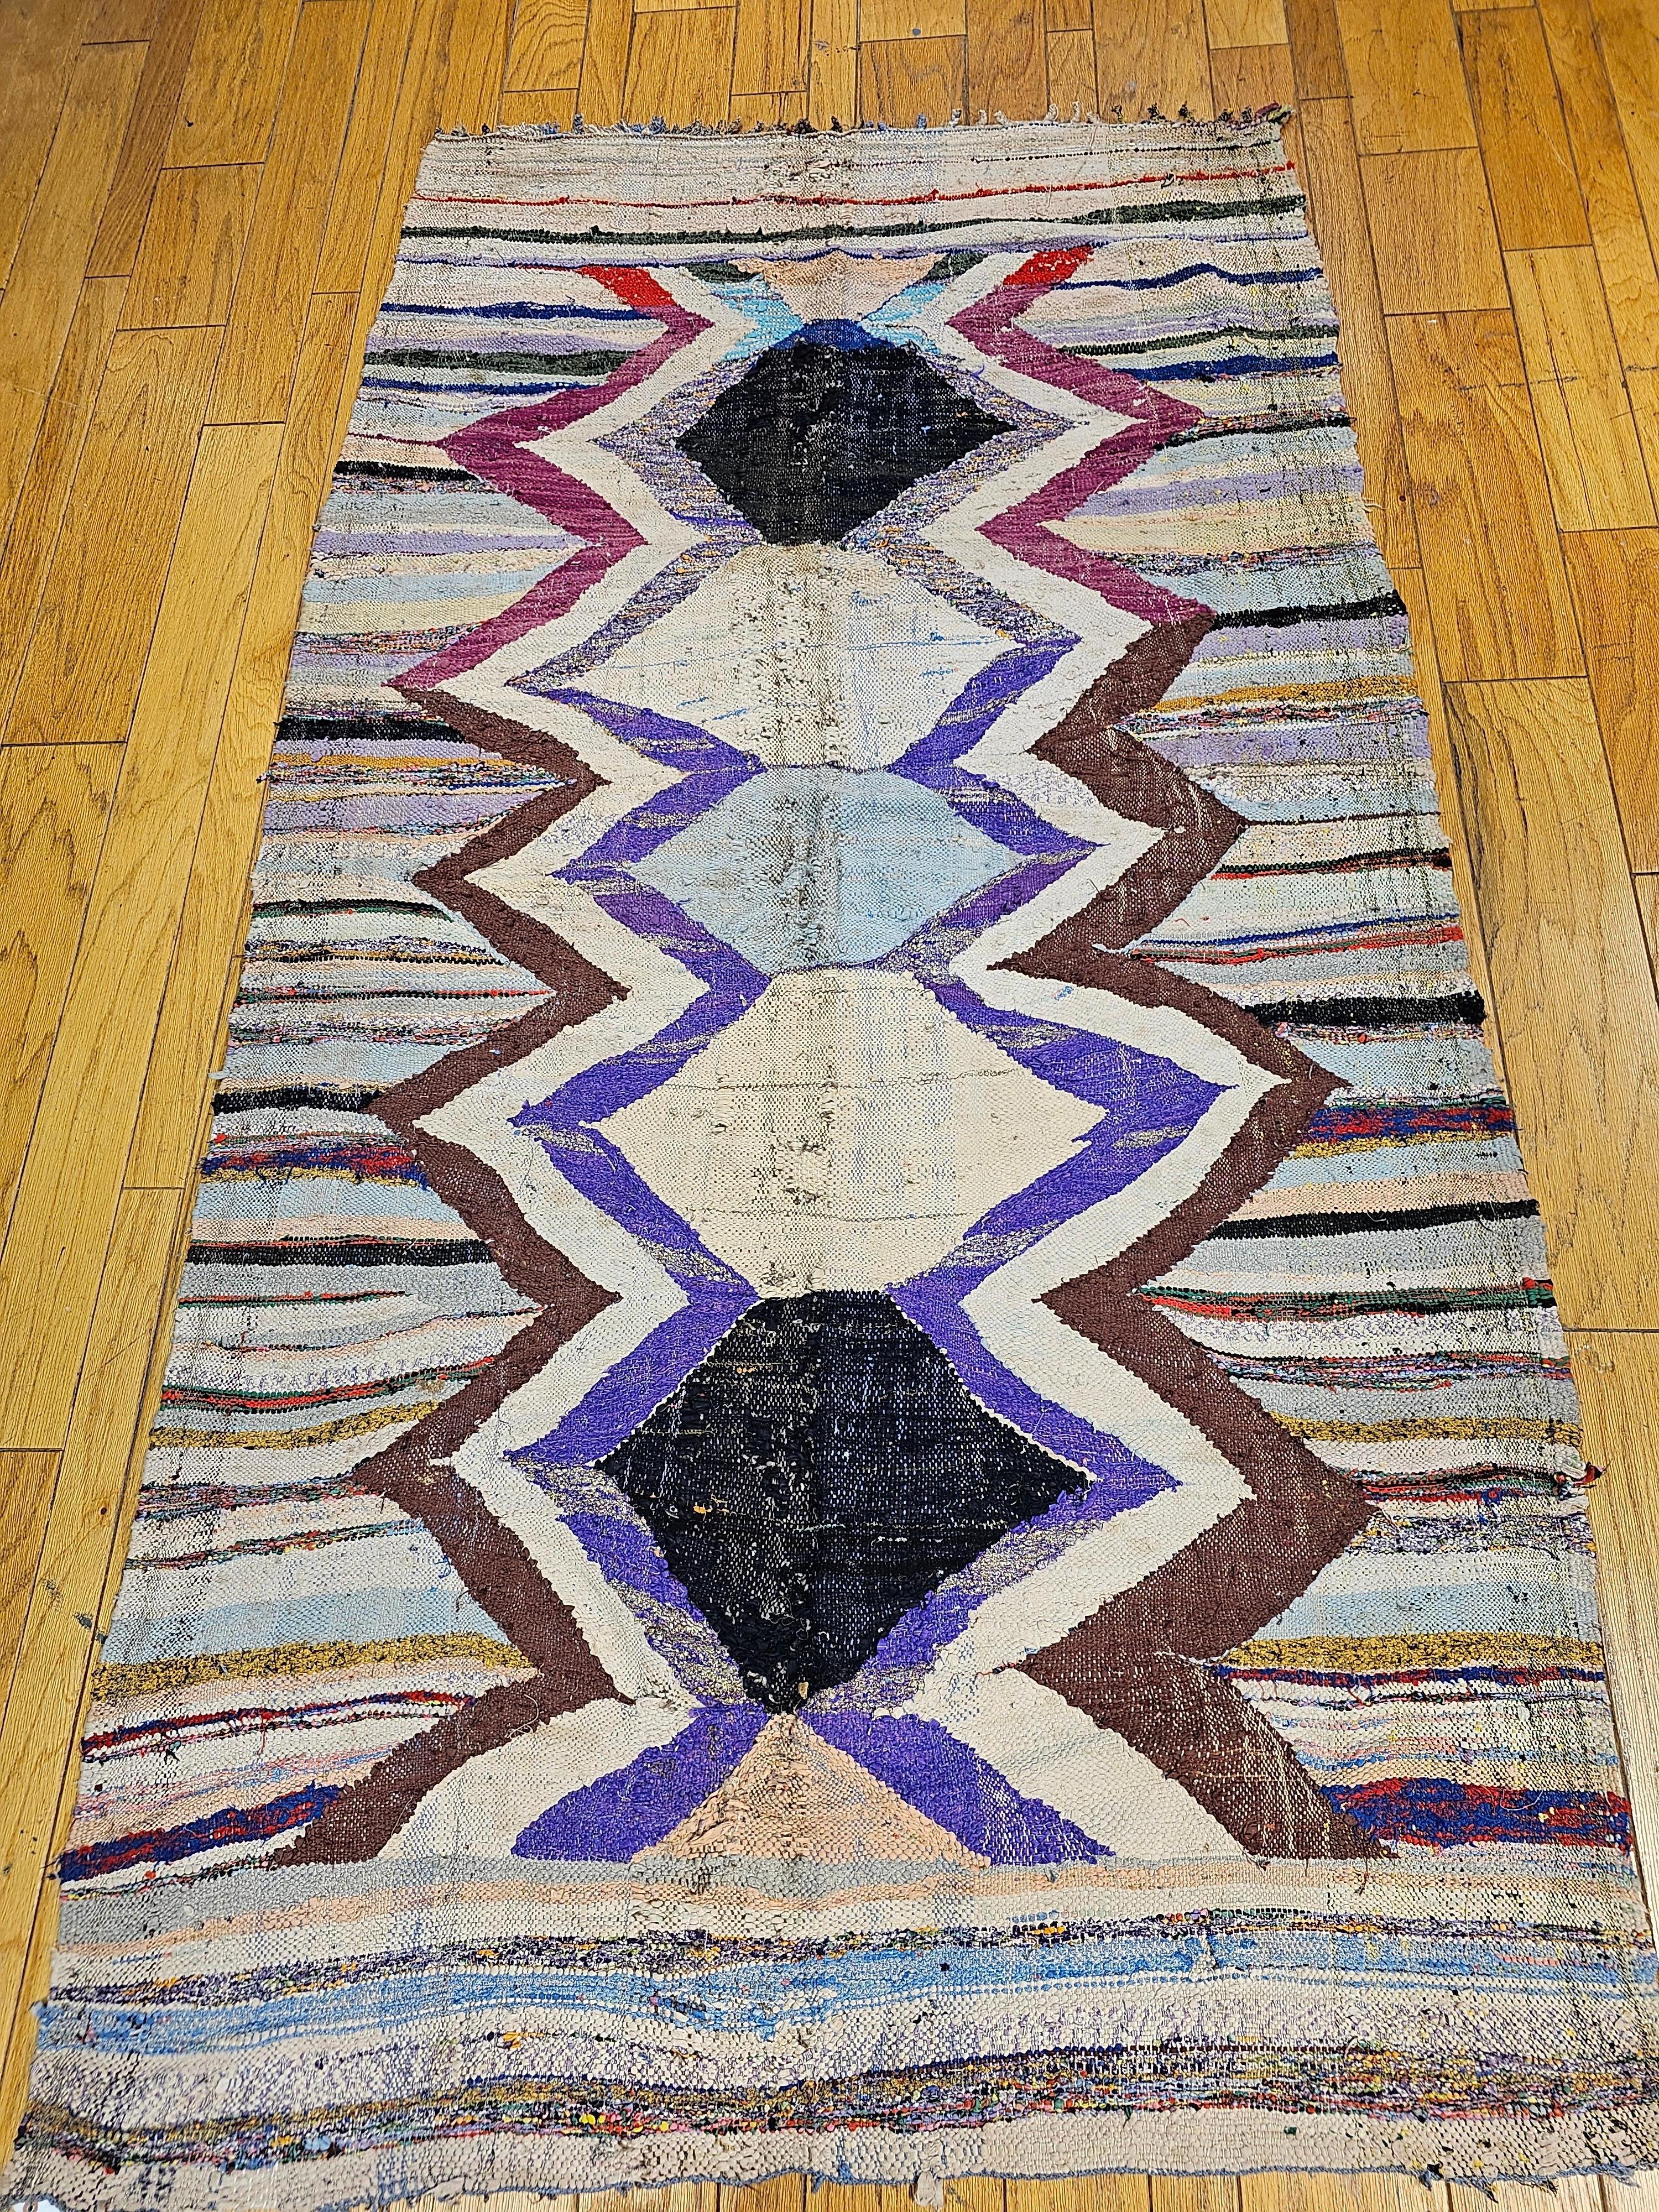 A vintage handmade  Moroccan flatwoven kilim with a wonderful large format geometric design pattern in beautiful colors of lavender, pale yellow, red, and black.  The kilim is the foundation piece for a Boucherouite rug.  The word “Boucherouite ''